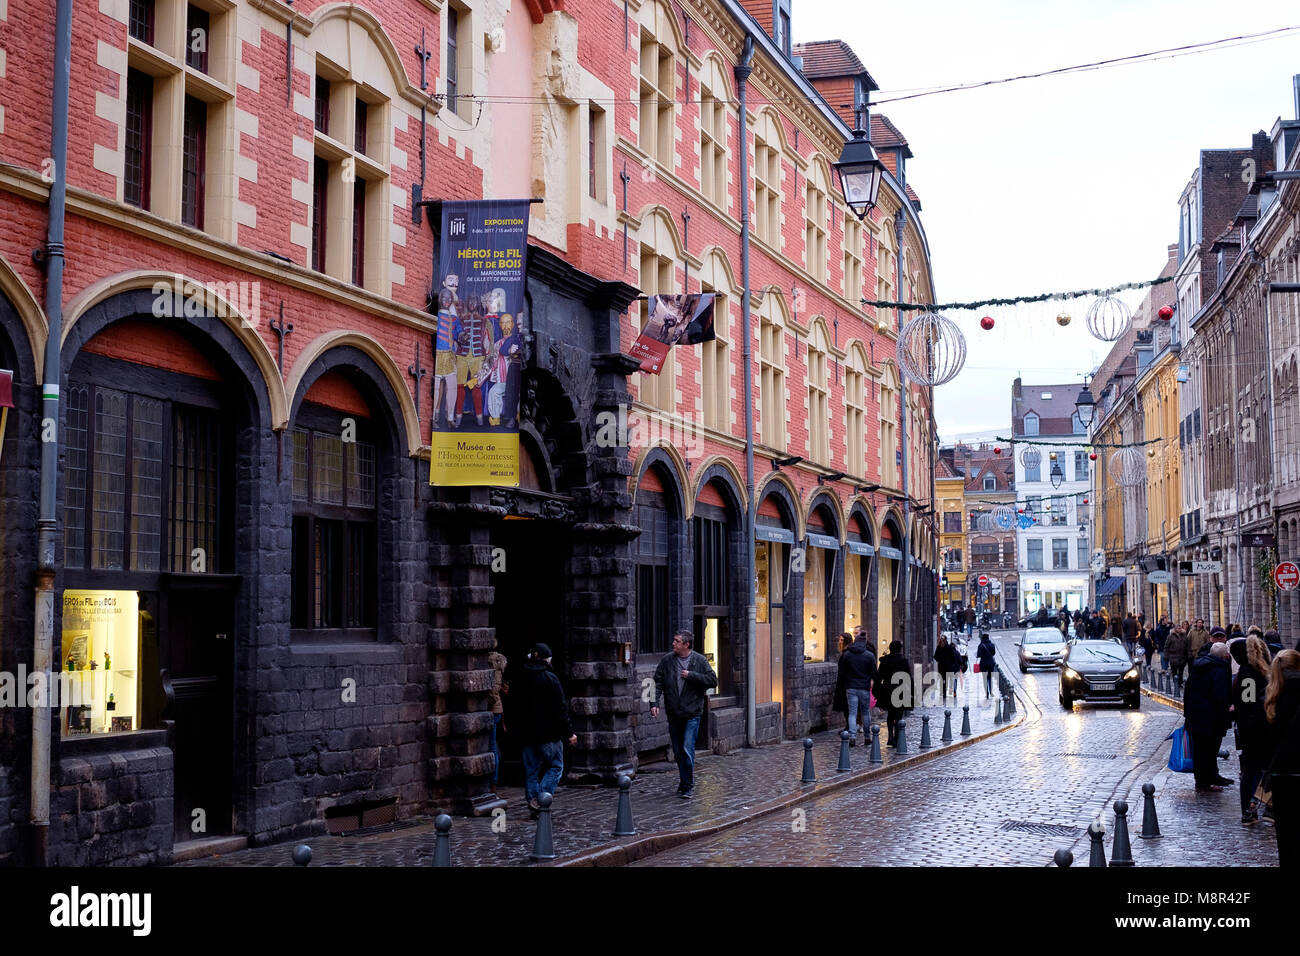 Street scene in the Old Lille - Musee de l’Hospice Comtesse, Lille Stock Photo